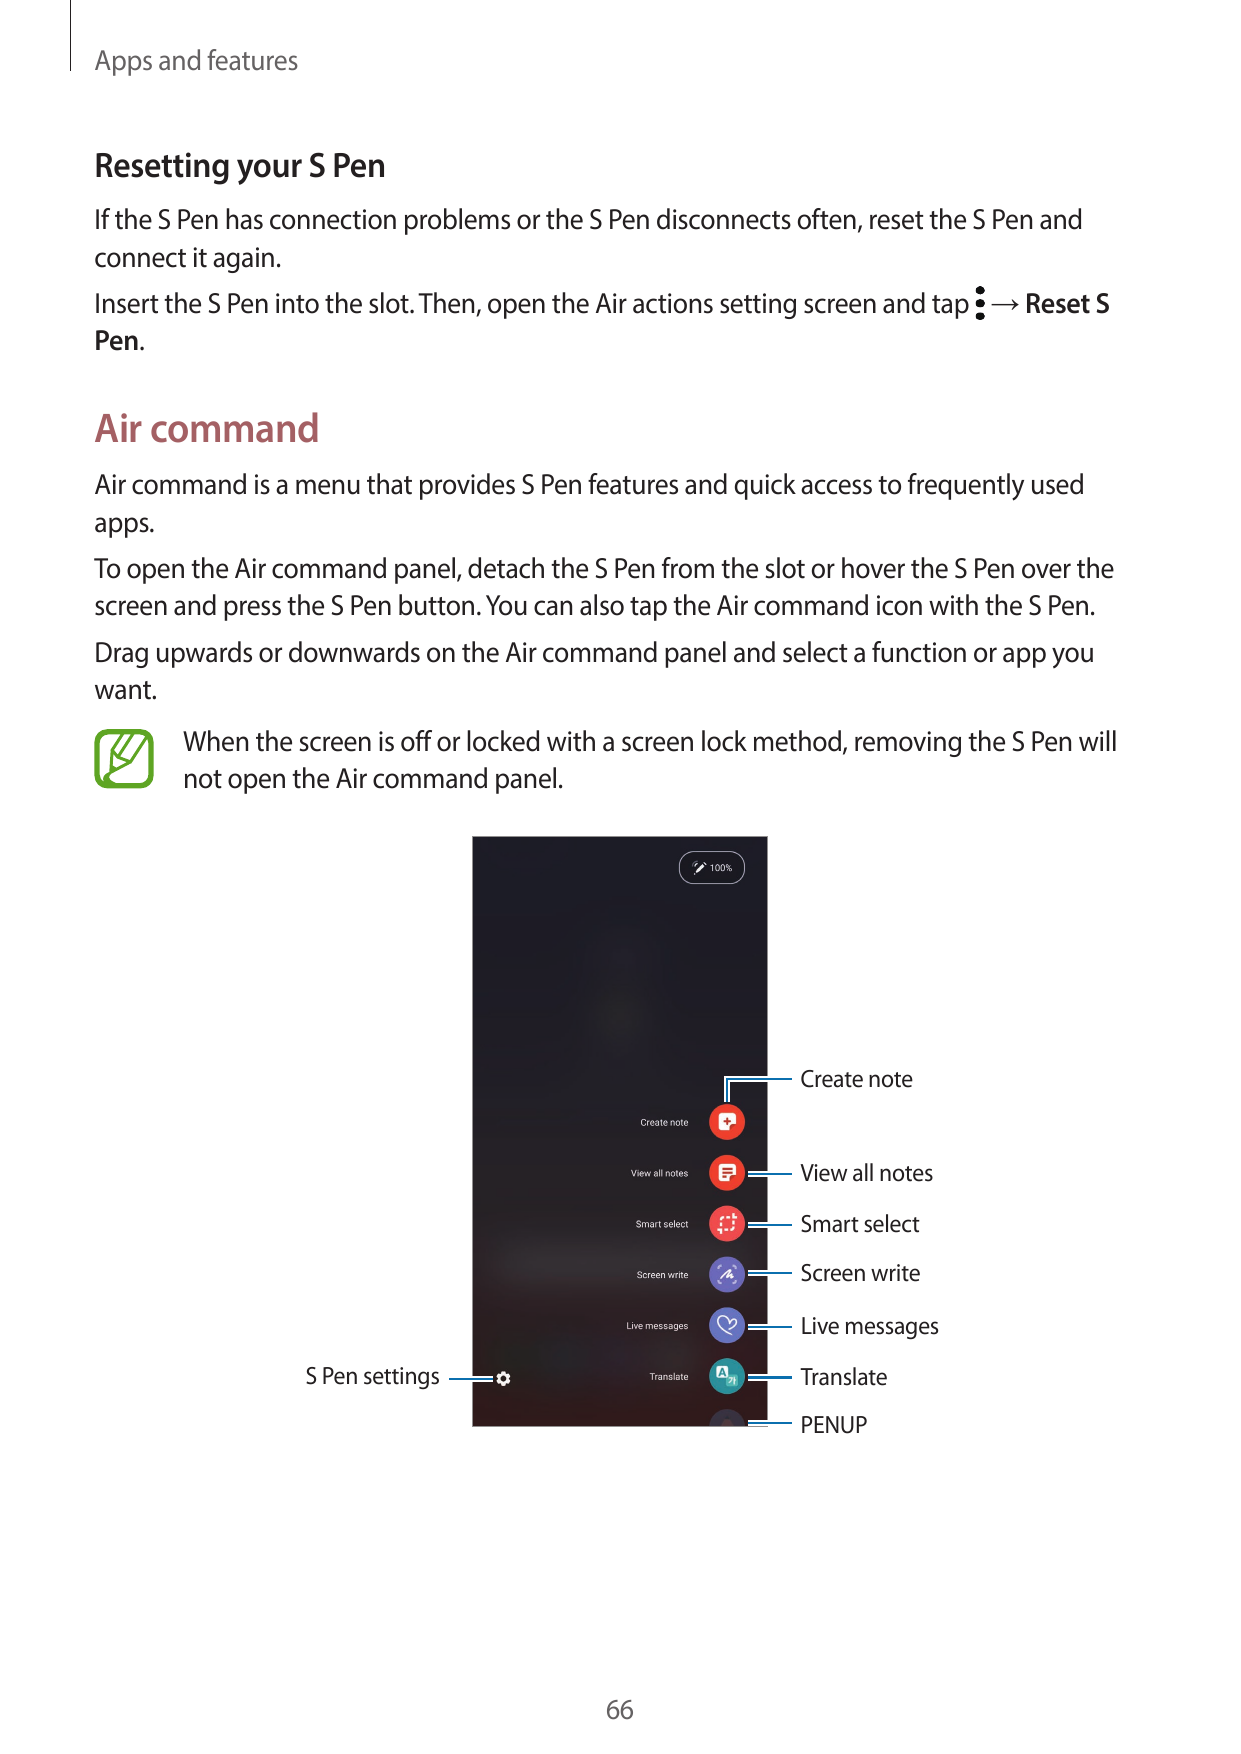 Apps and featuresResetting your S PenIf the S Pen has connection problems or the S Pen disconnects often, reset the S Pen andcon